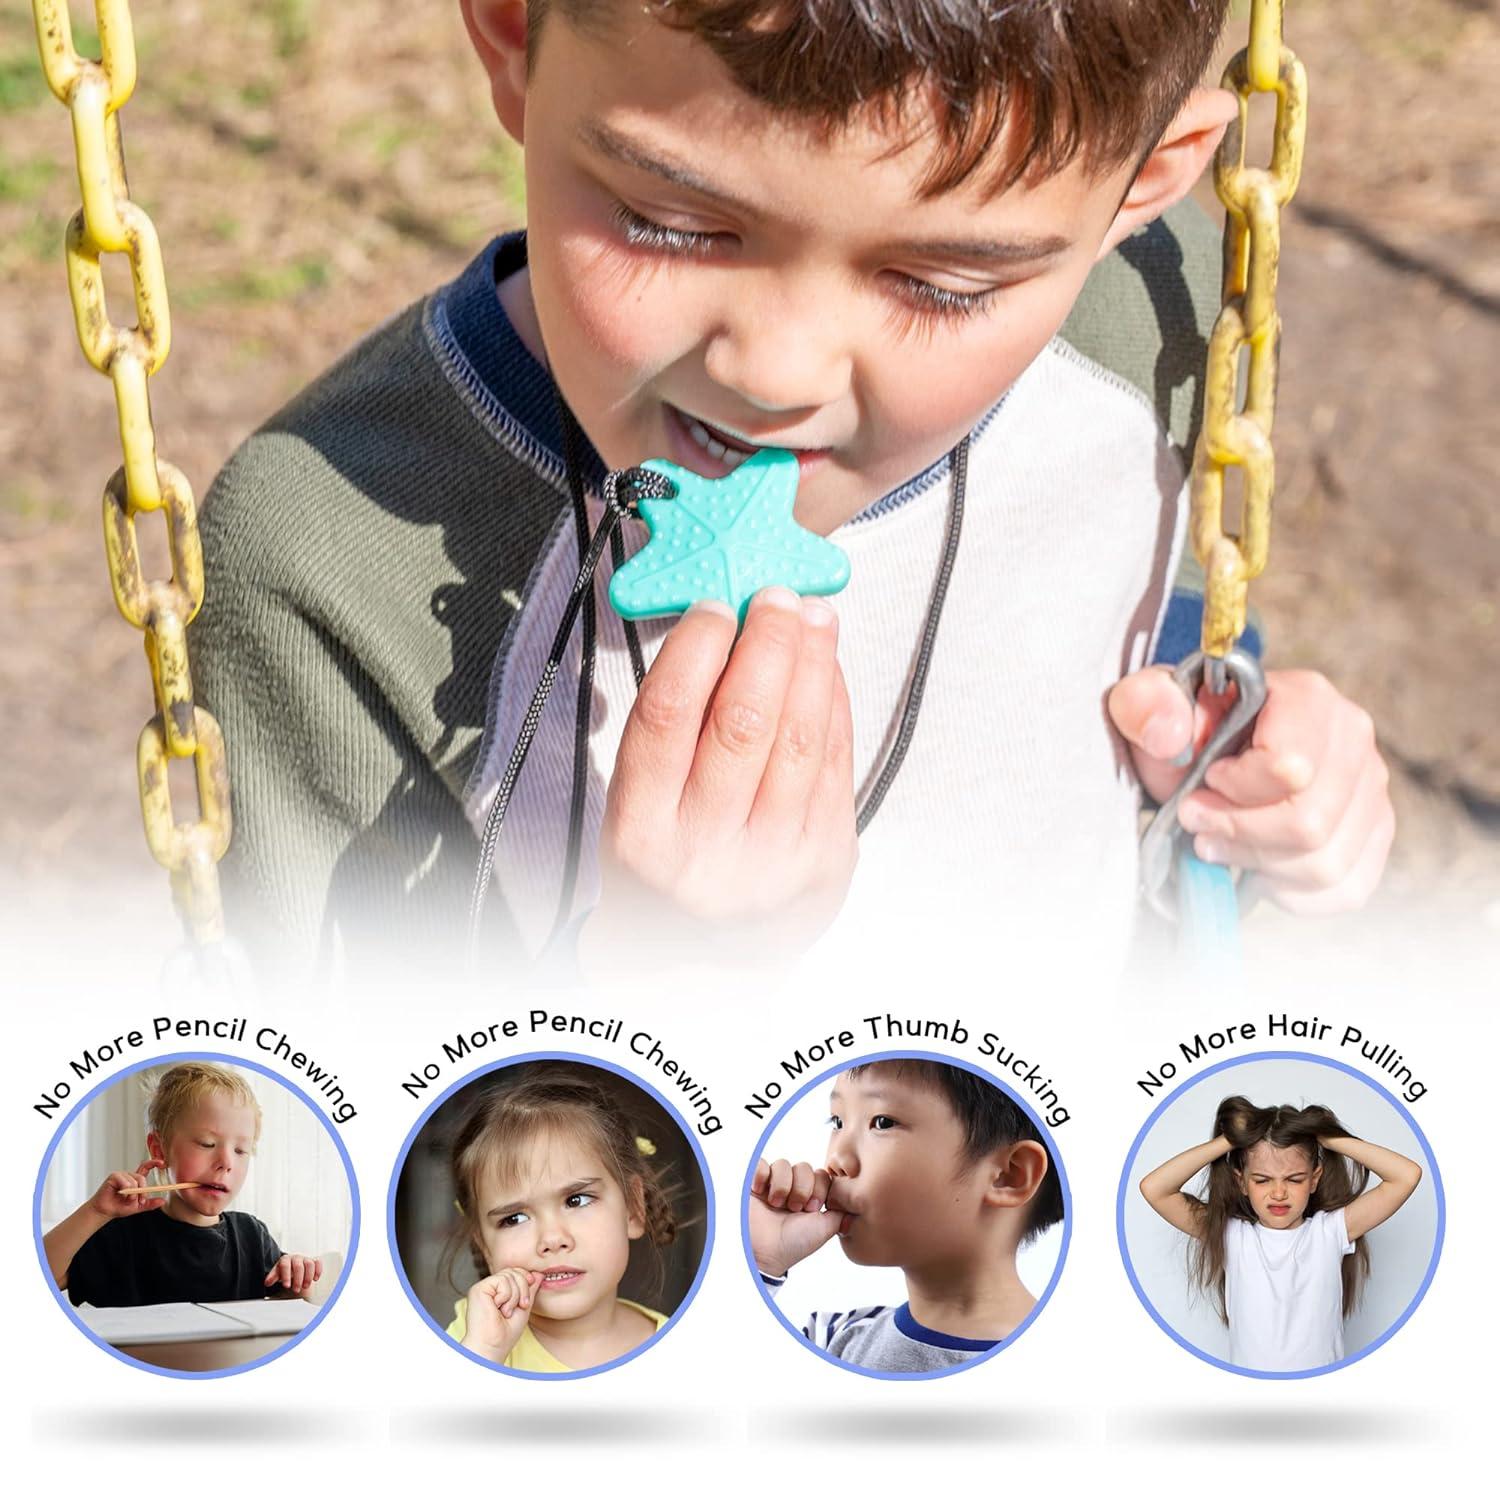 Sensory Chew Necklaces for Kids Girls, Oral Fixation Autism Sensory Chew  Toys for Kids with Anxiety ADHD, Chewy Necklaces Sensory Fidgets Necklaces  for ADHD Chewing Sensory